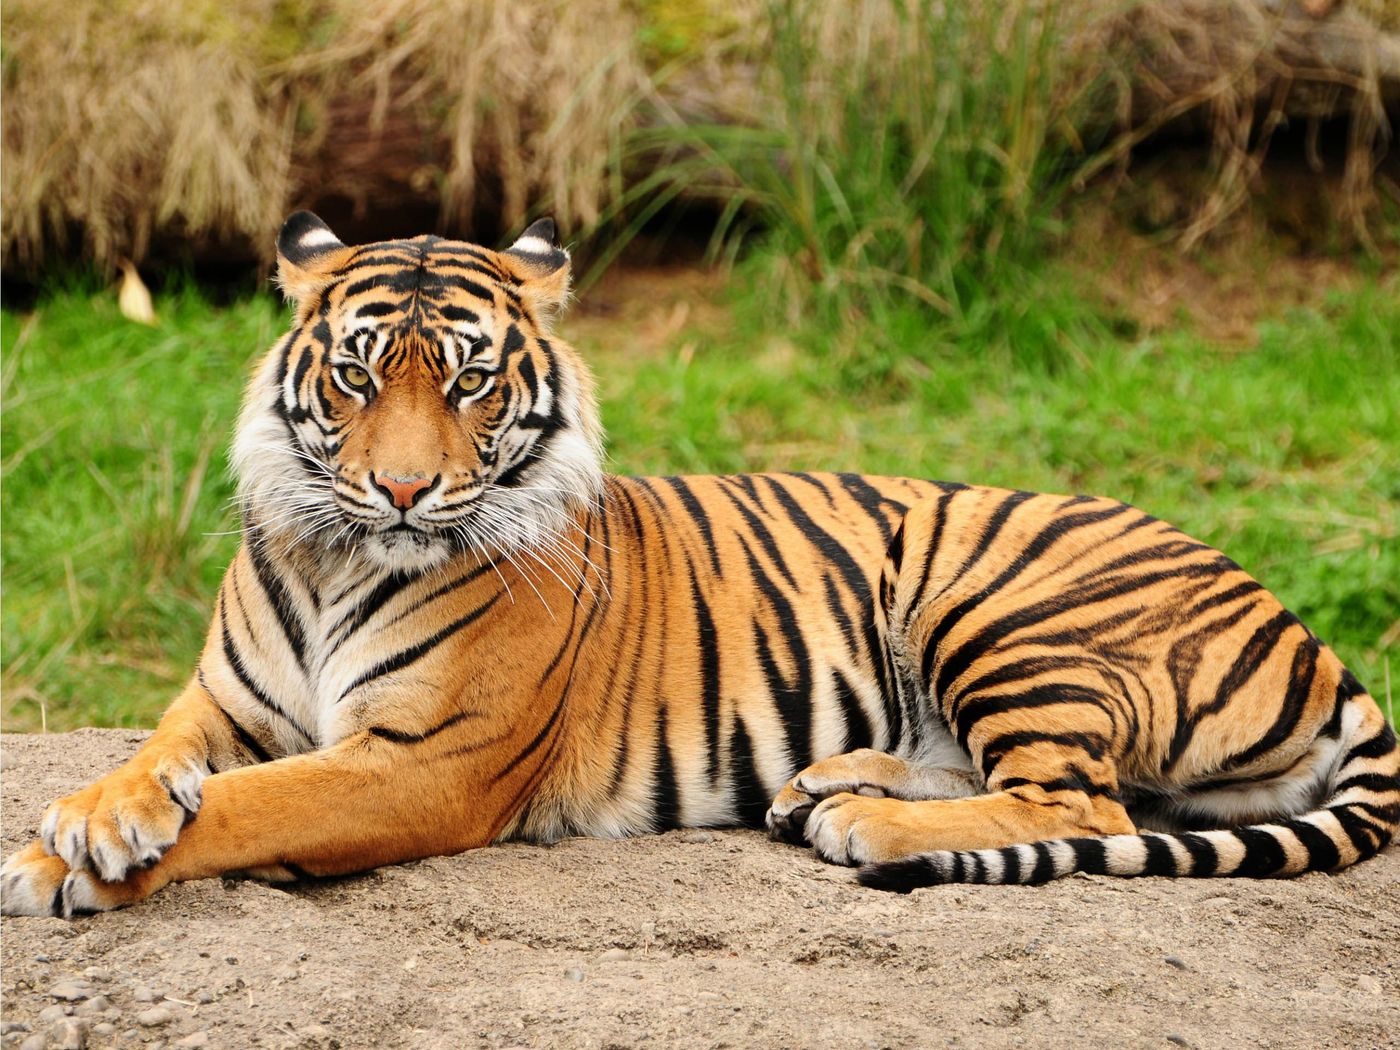 Tiger populations around the world are lower than we want them to be, but new tactics could double population by 2022.